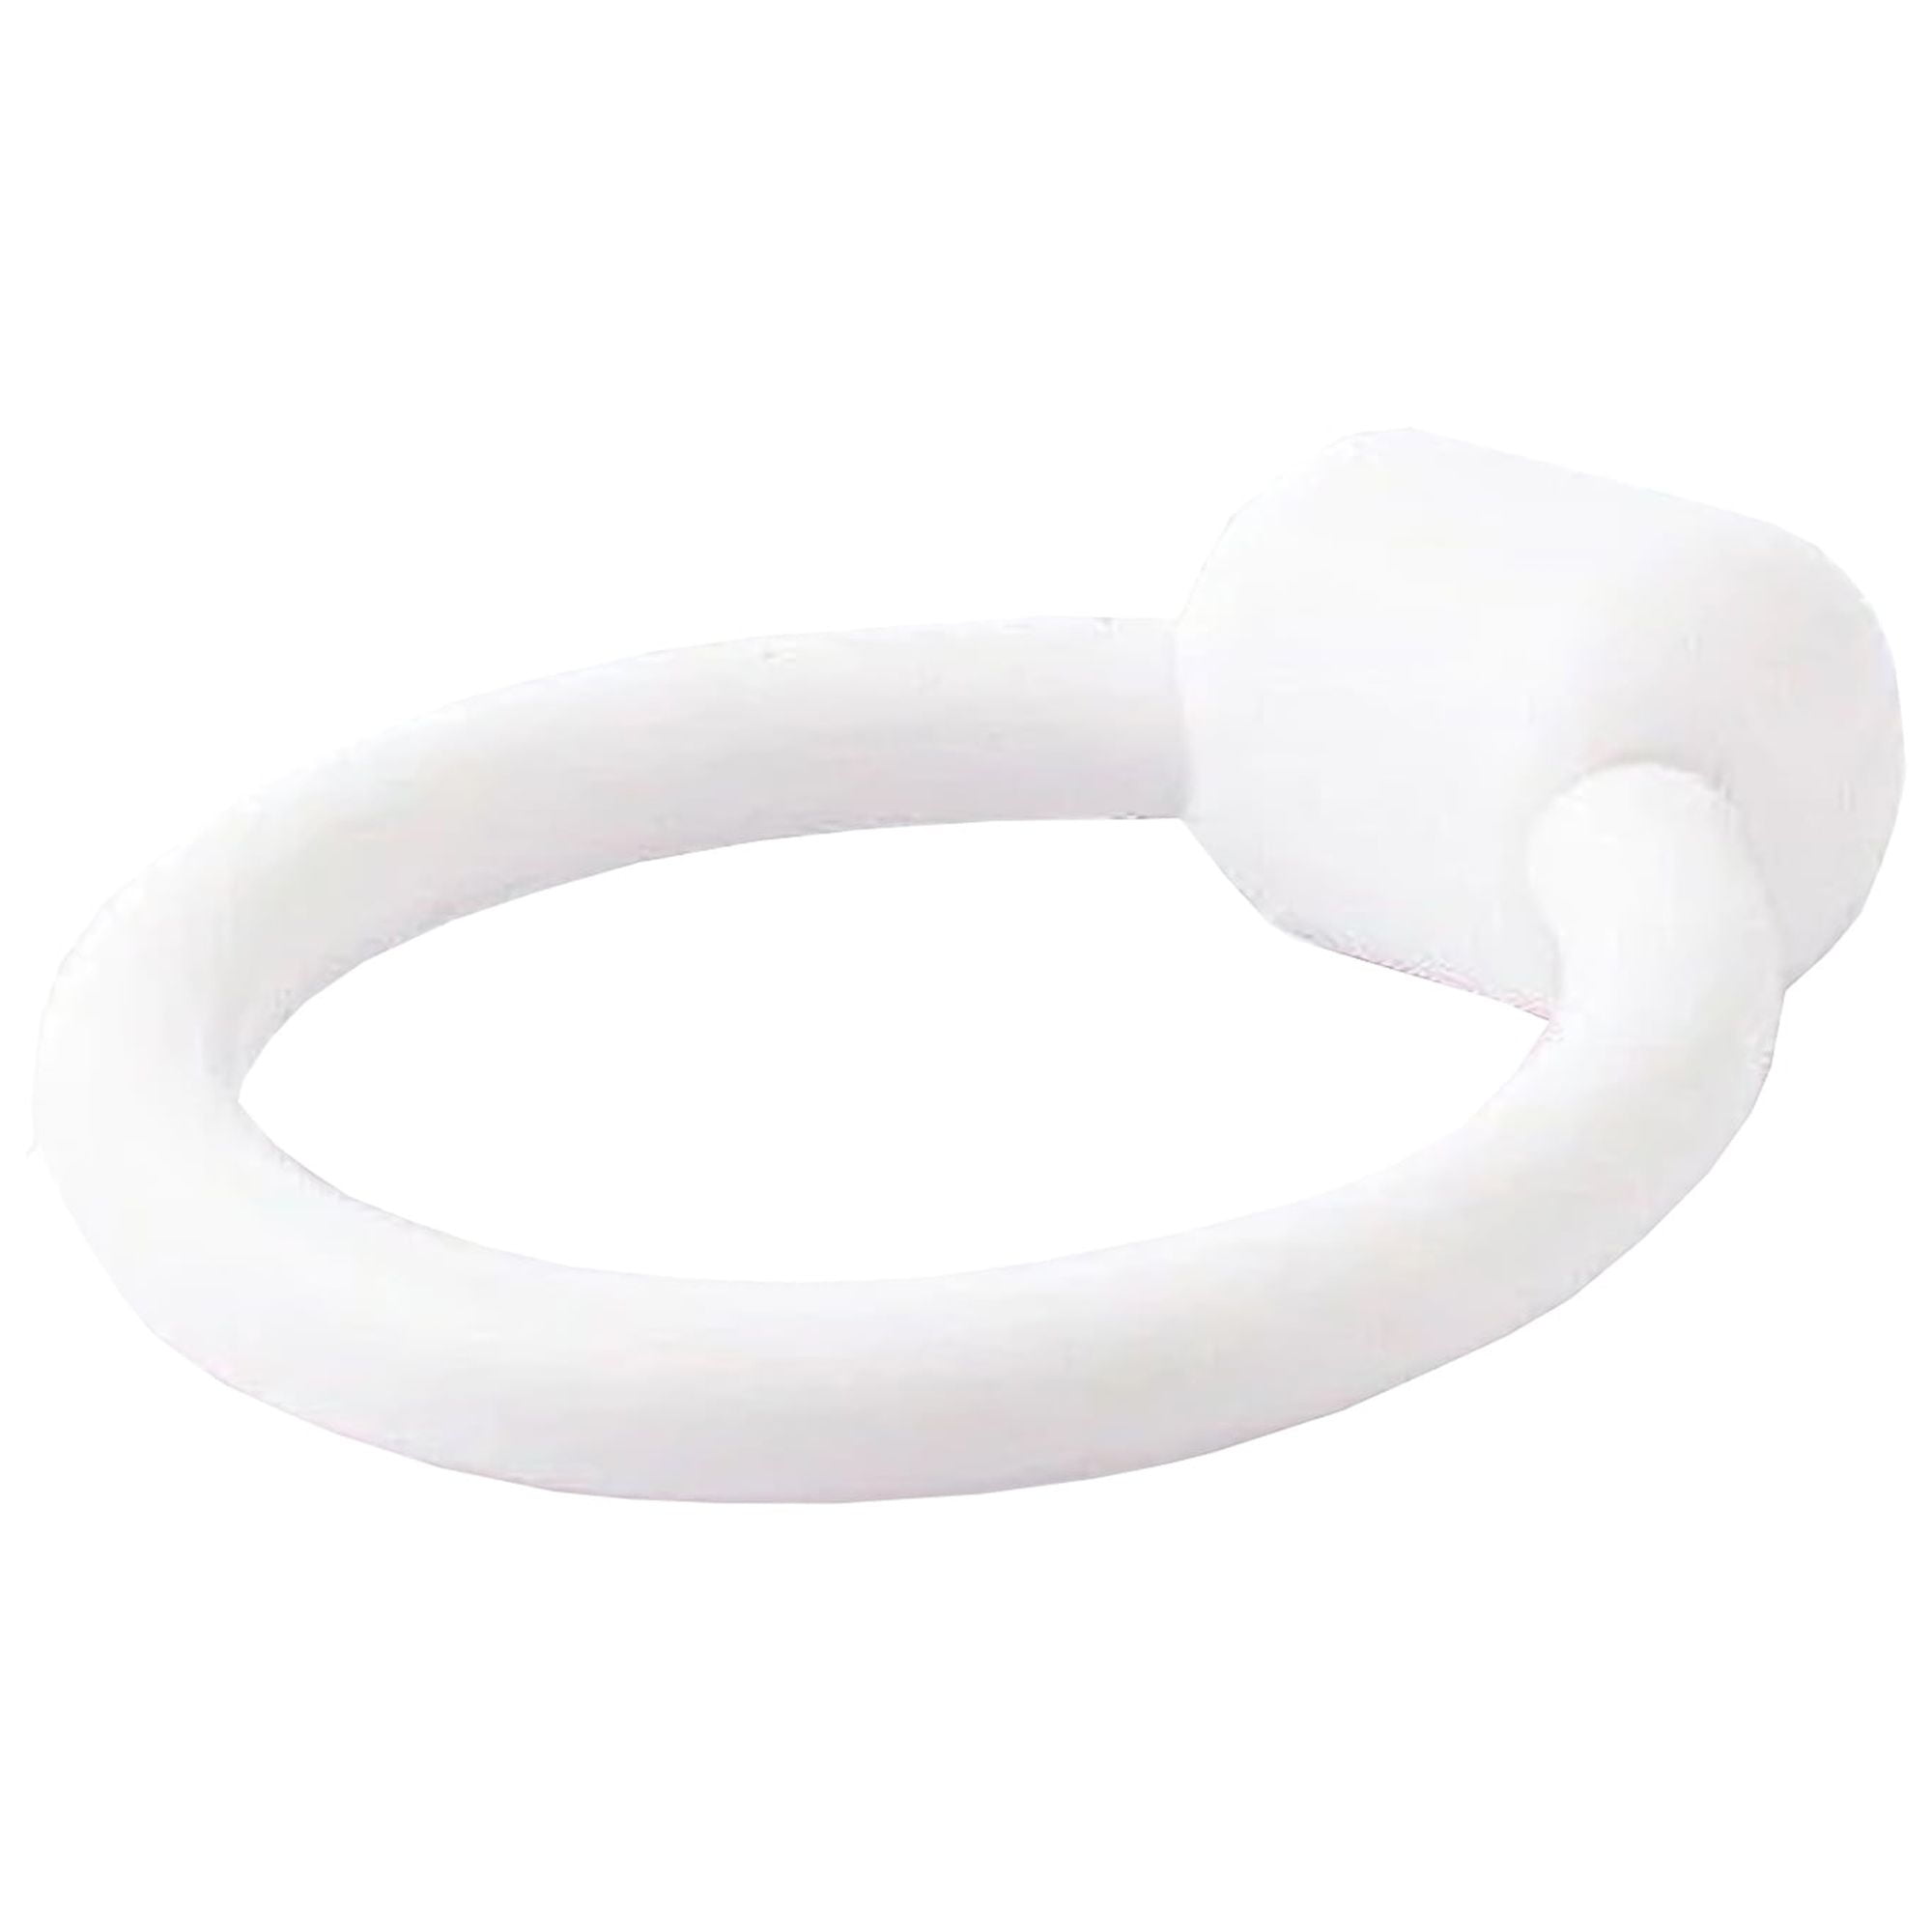 Ring Pessary - MedGyn Ring Pessary For Pelvic Support